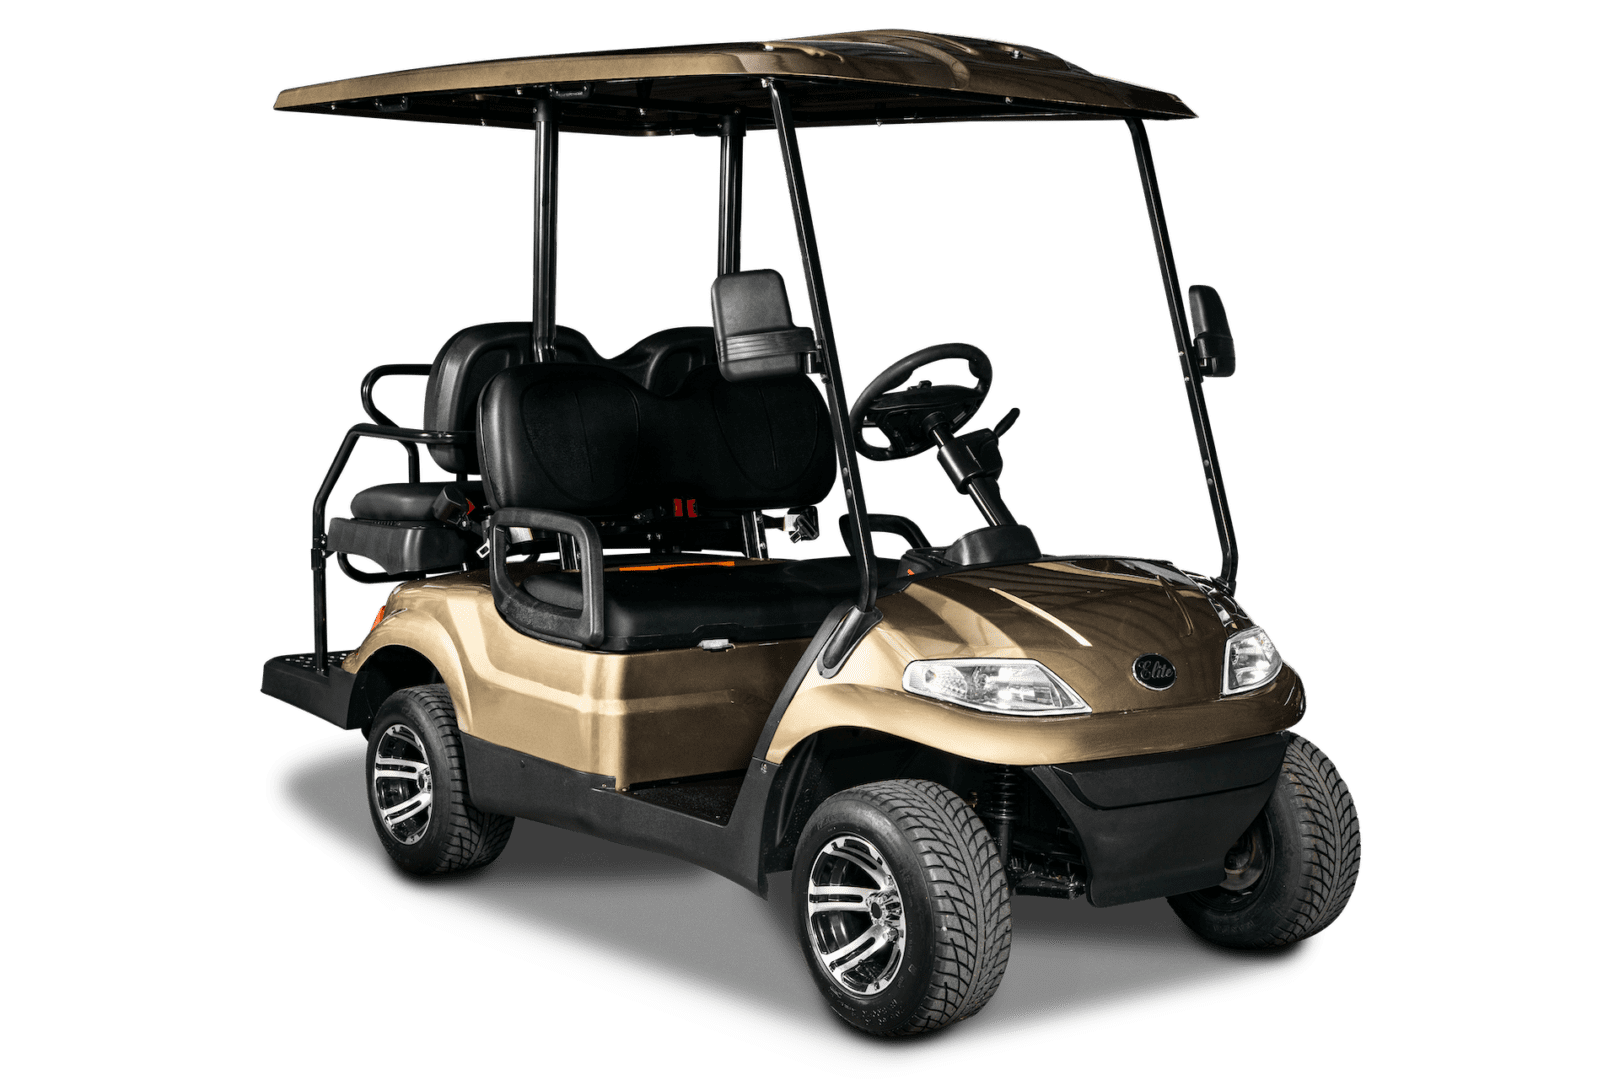 A golf cart with a canopy is shown.